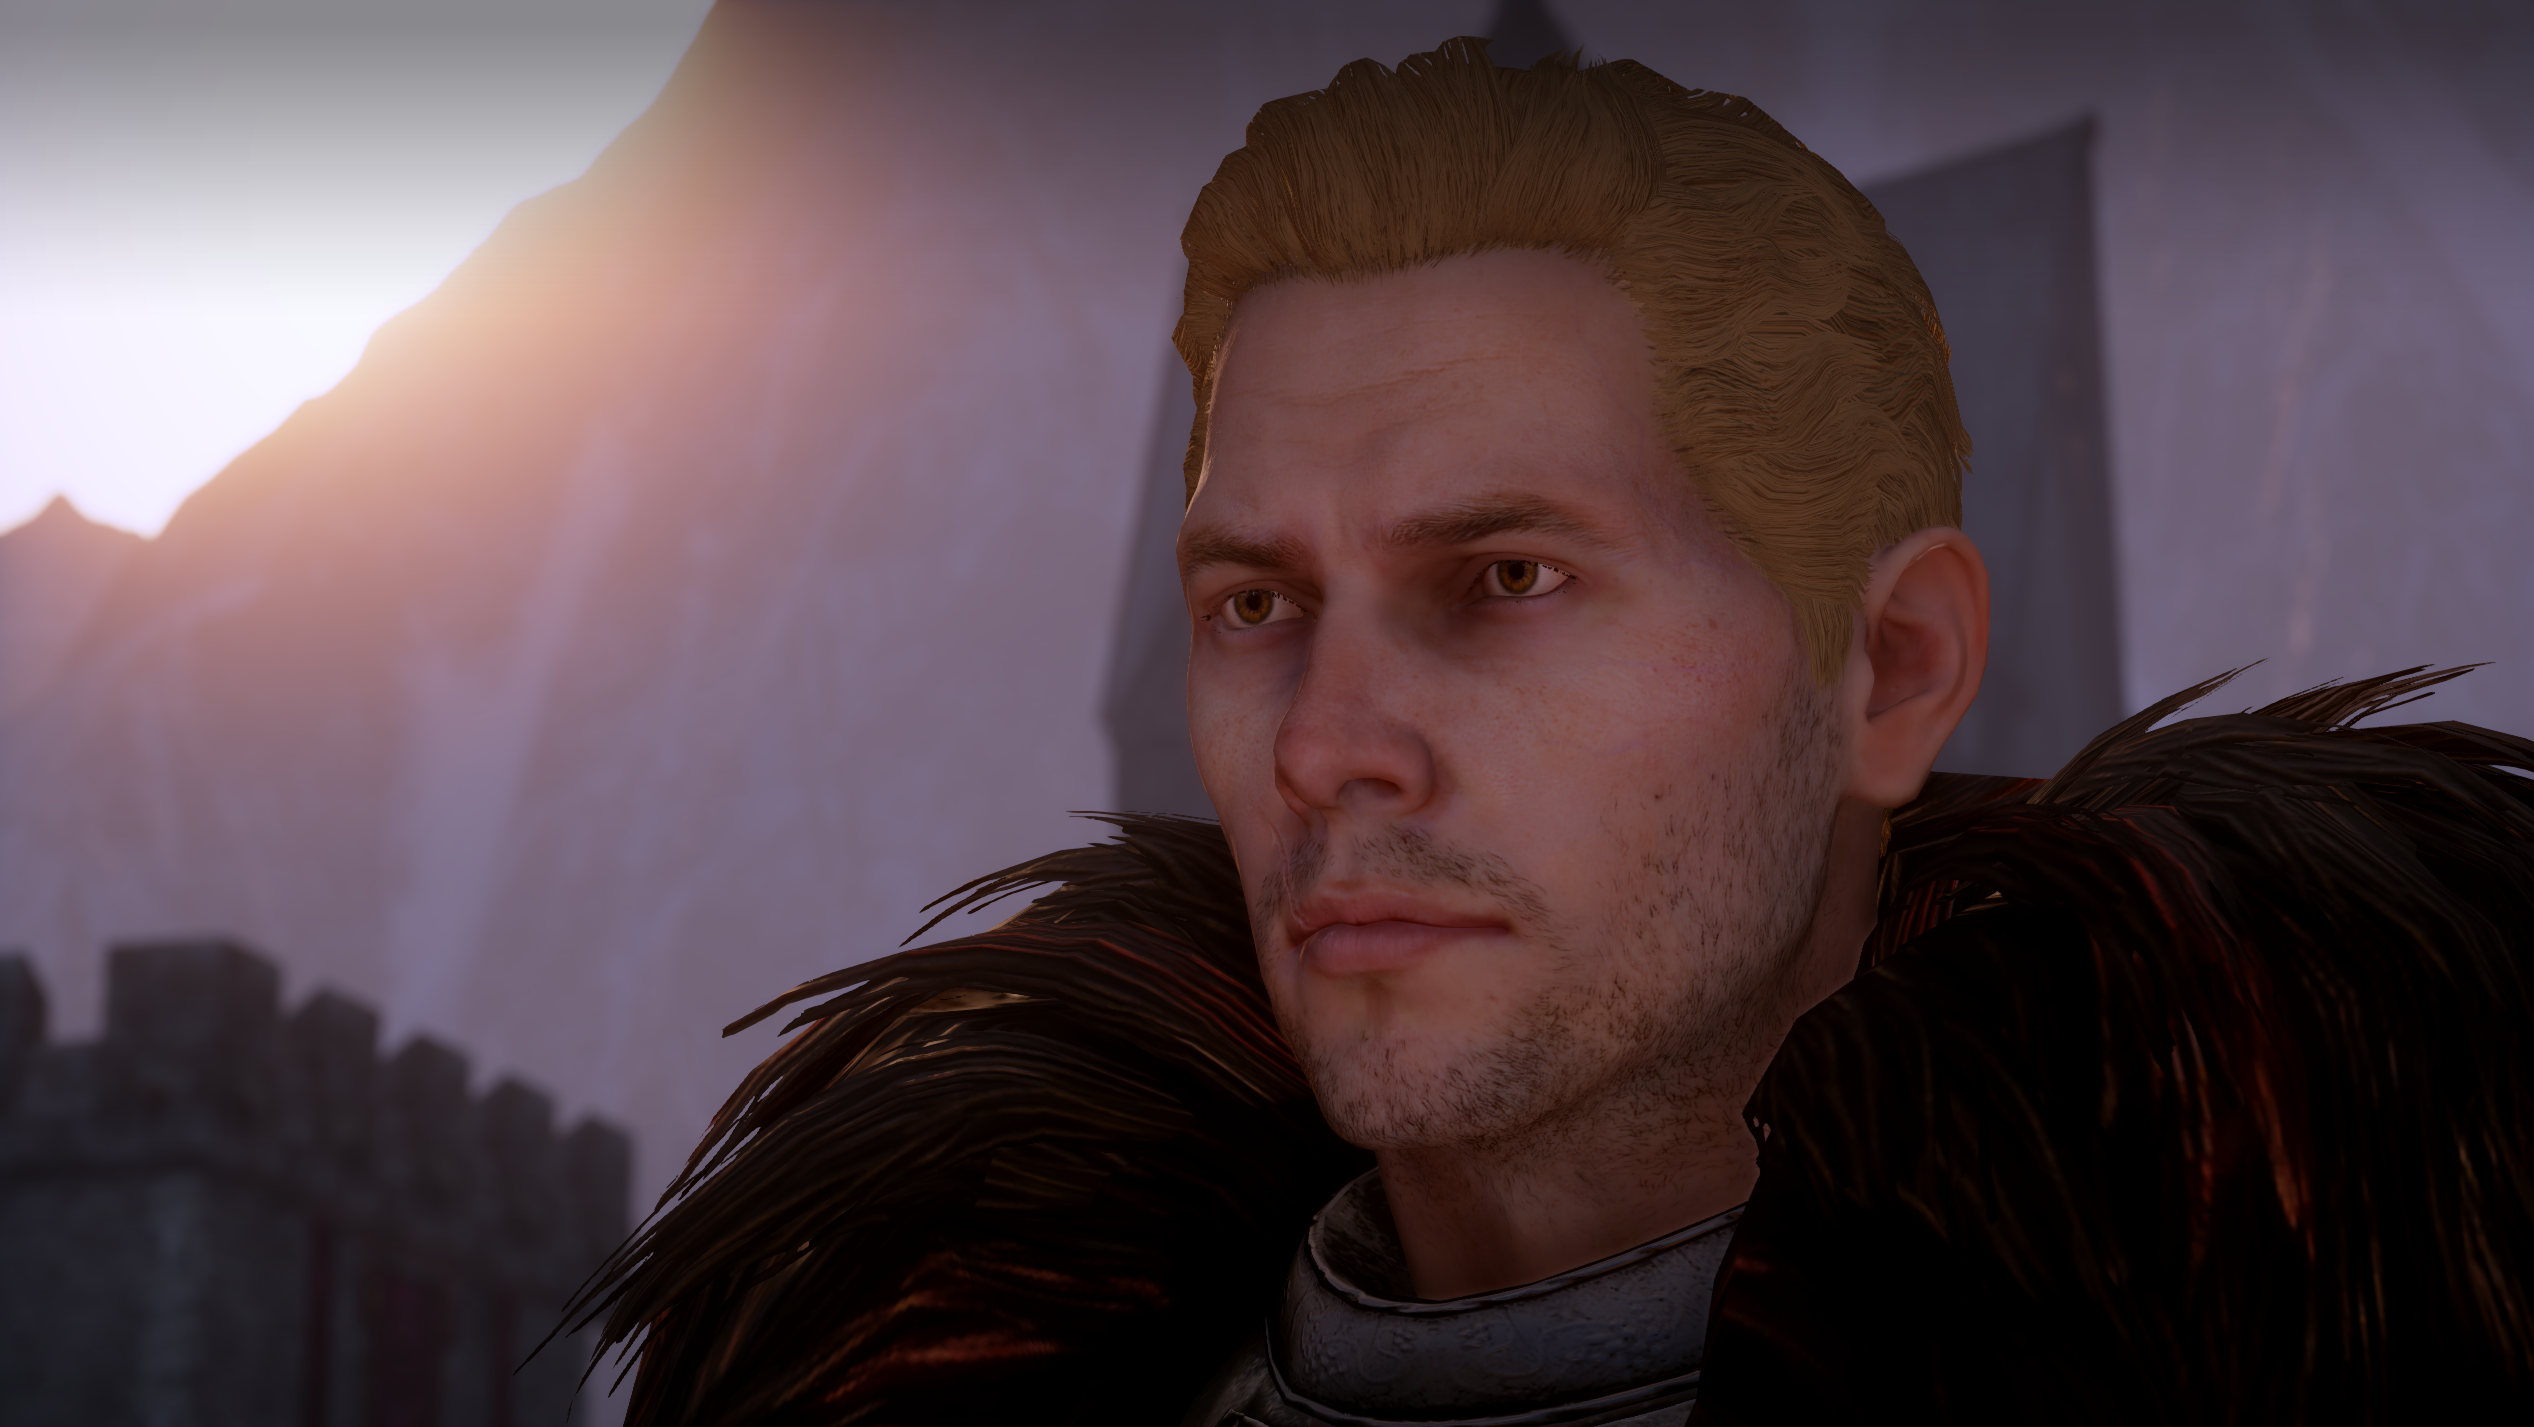 Dragon Age Inquisition Dragon Age Cullen Rutherford PC Gaming 2534x1427